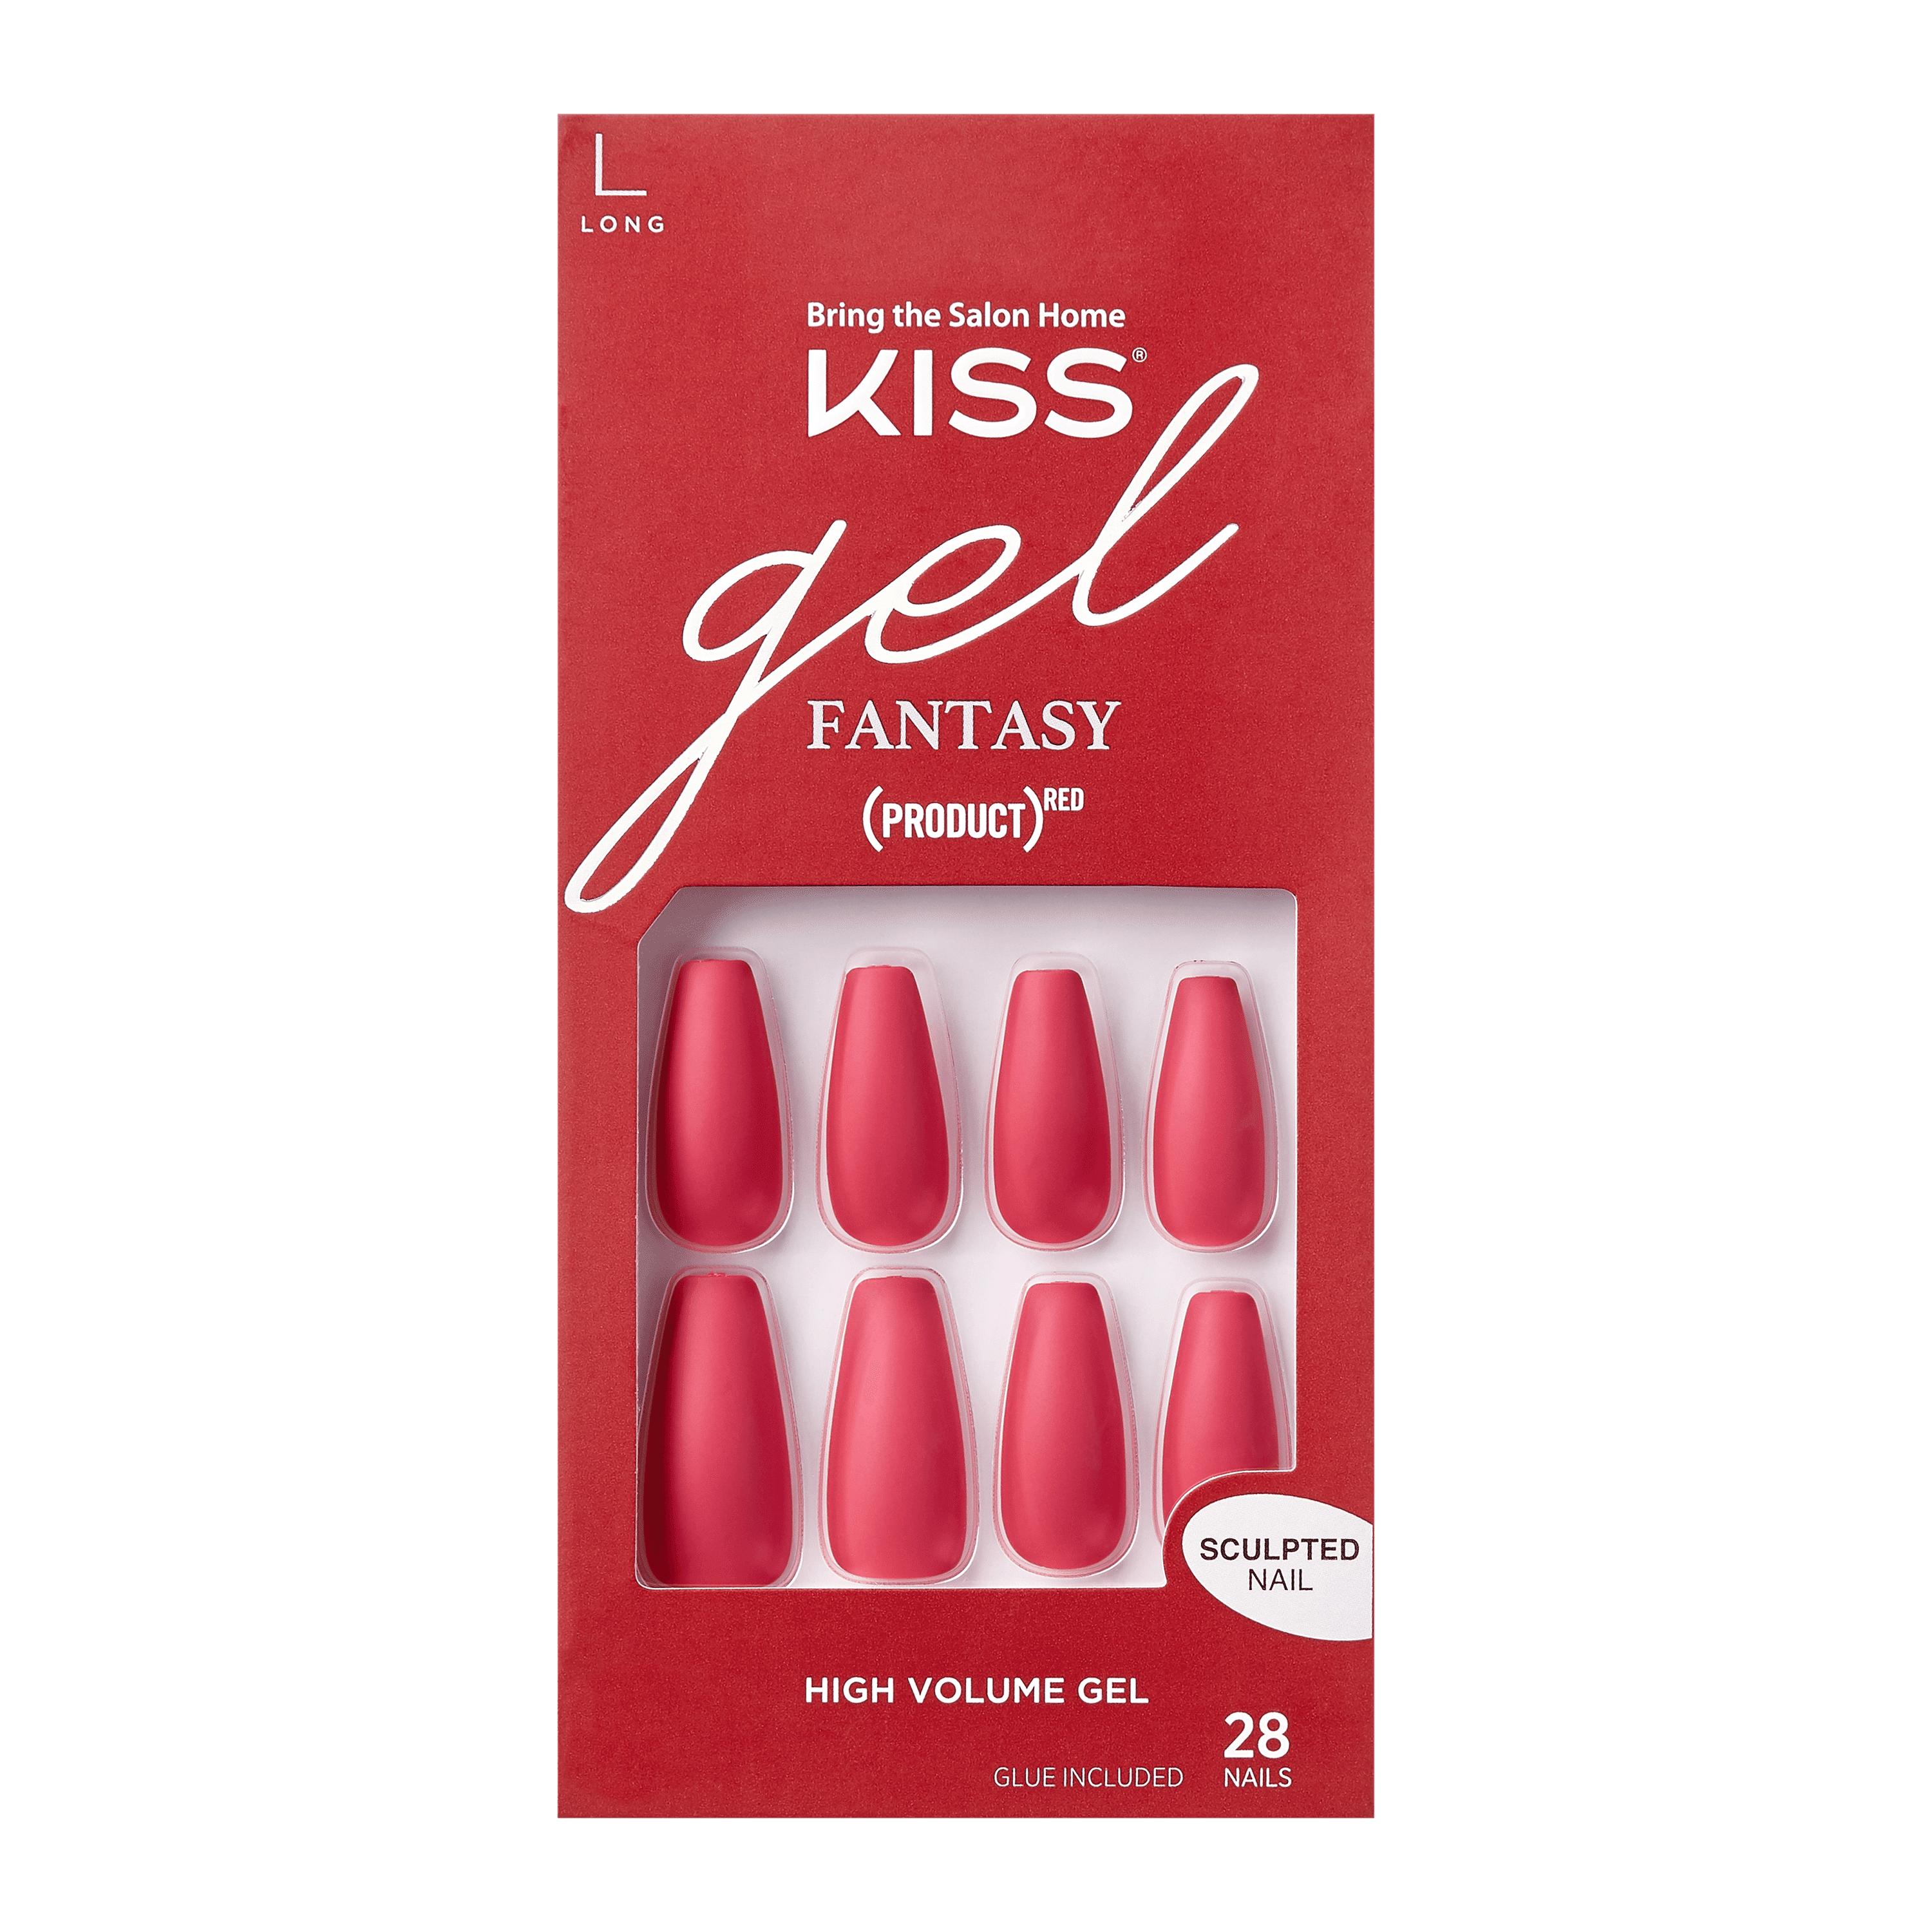 KISS USA KISS Gel Fantasy Ready-to-Wear Fake Nails, (PRODUCT)RED 'Love', 28 Count